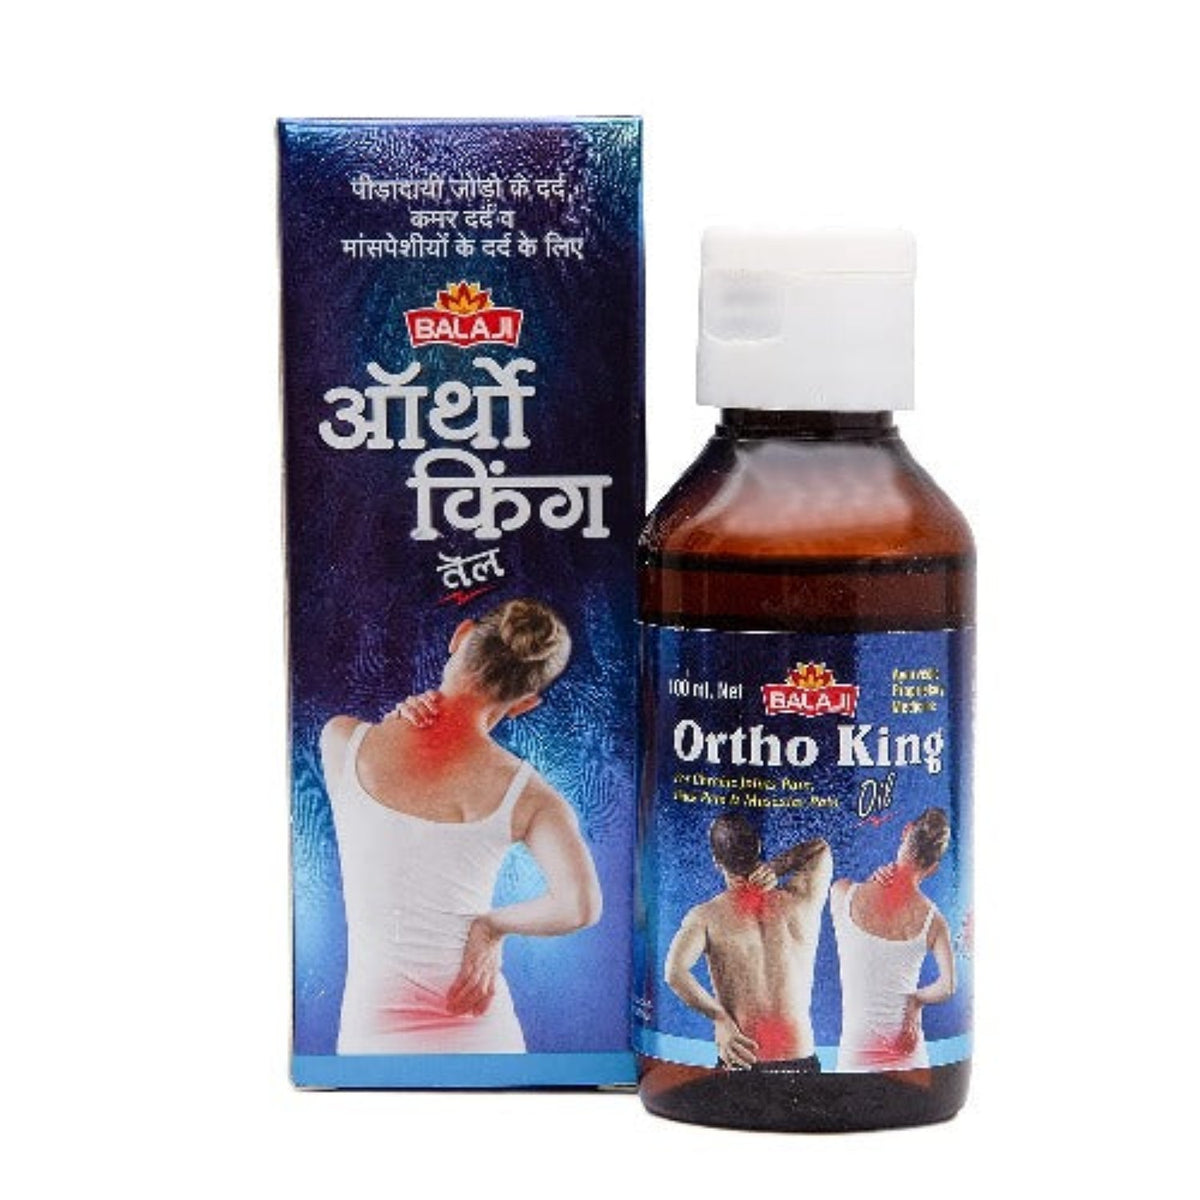 Balaji Sansthan Ayurvedic Ortho King Pain Relief Oil Blend Off All Herbal Oils For Knee,Joints,Muscle,Back Pain Provides Long Lasting And Healthy Joints Oil & Capsule